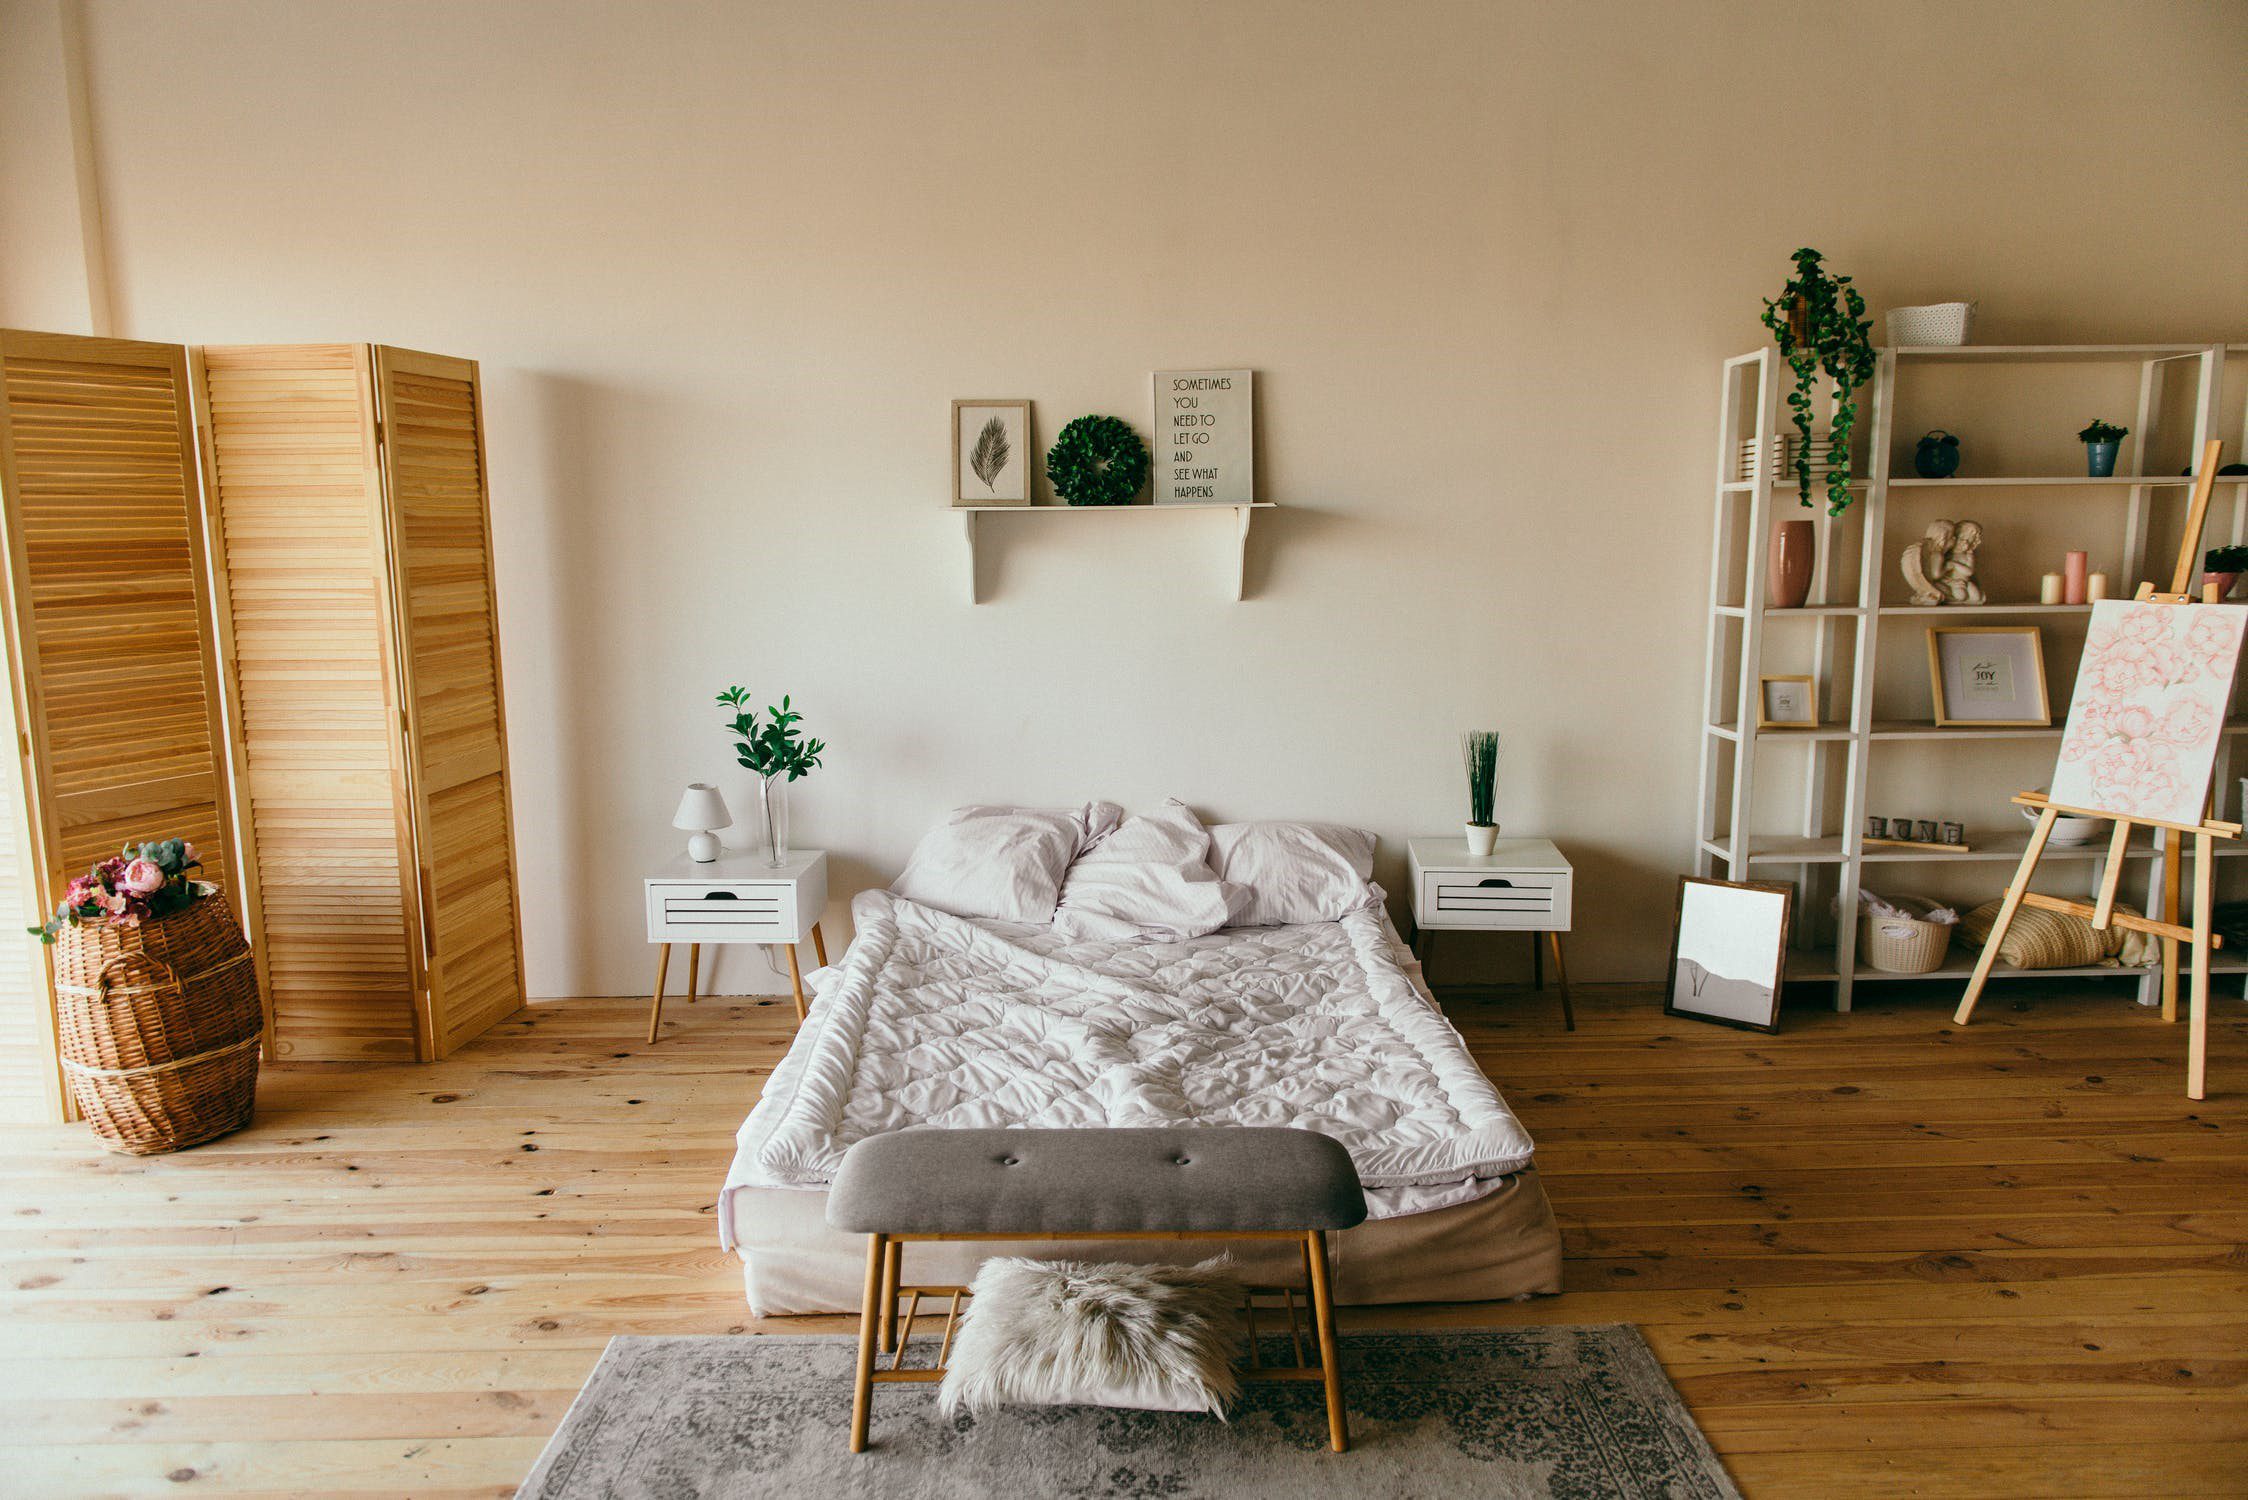 10 Budget-Friendly Options for Styling Your Rental Property